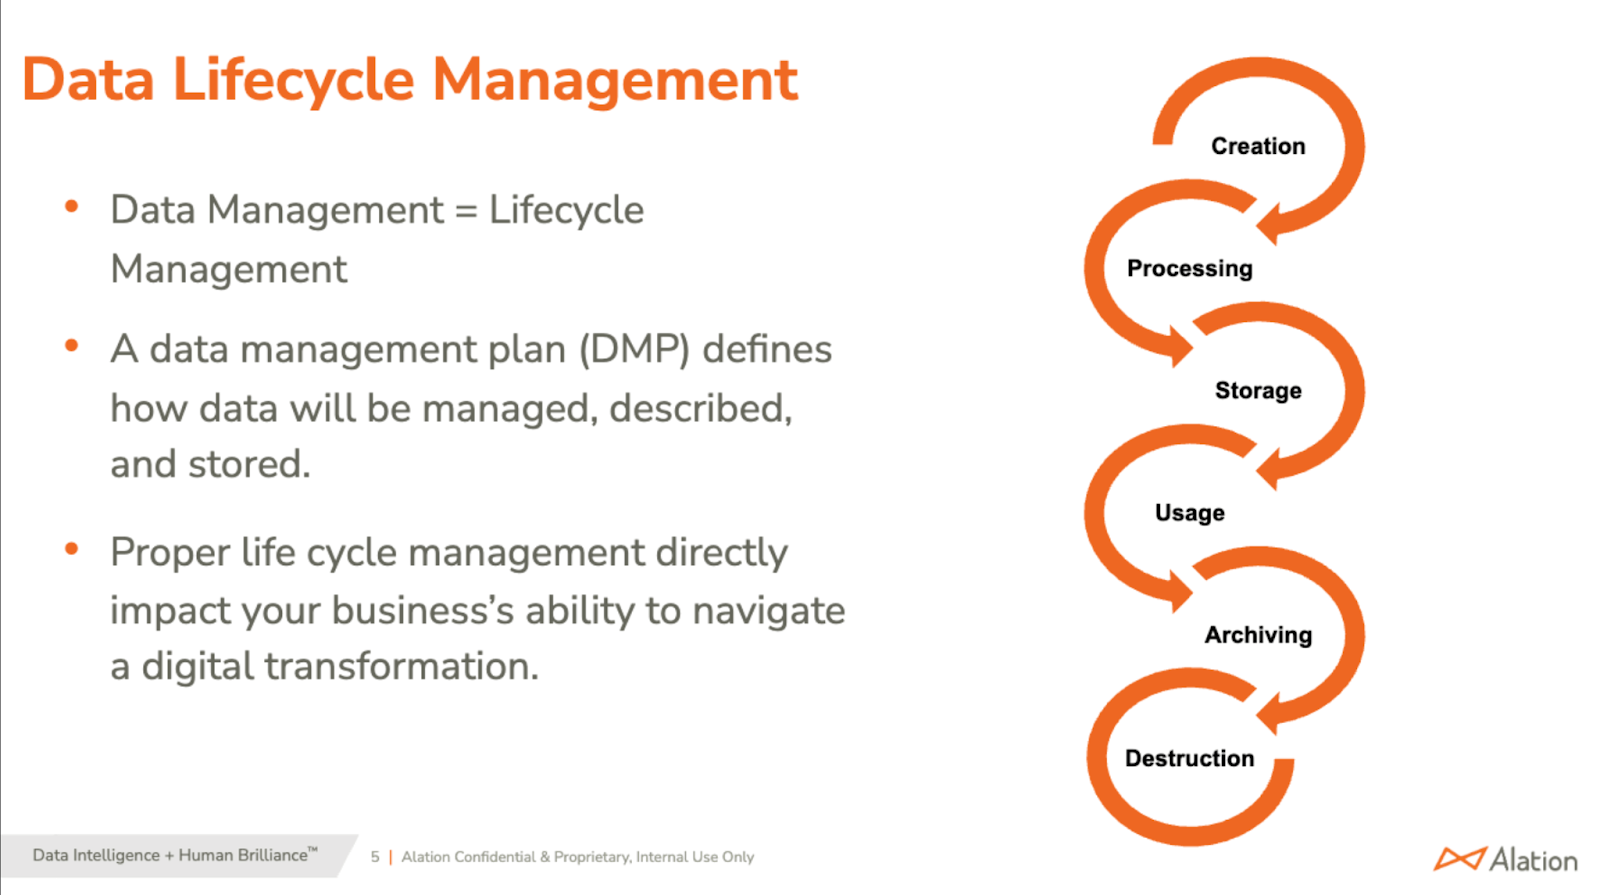 Image showing the 6 steps of data lifecycle management within a data catalog. 